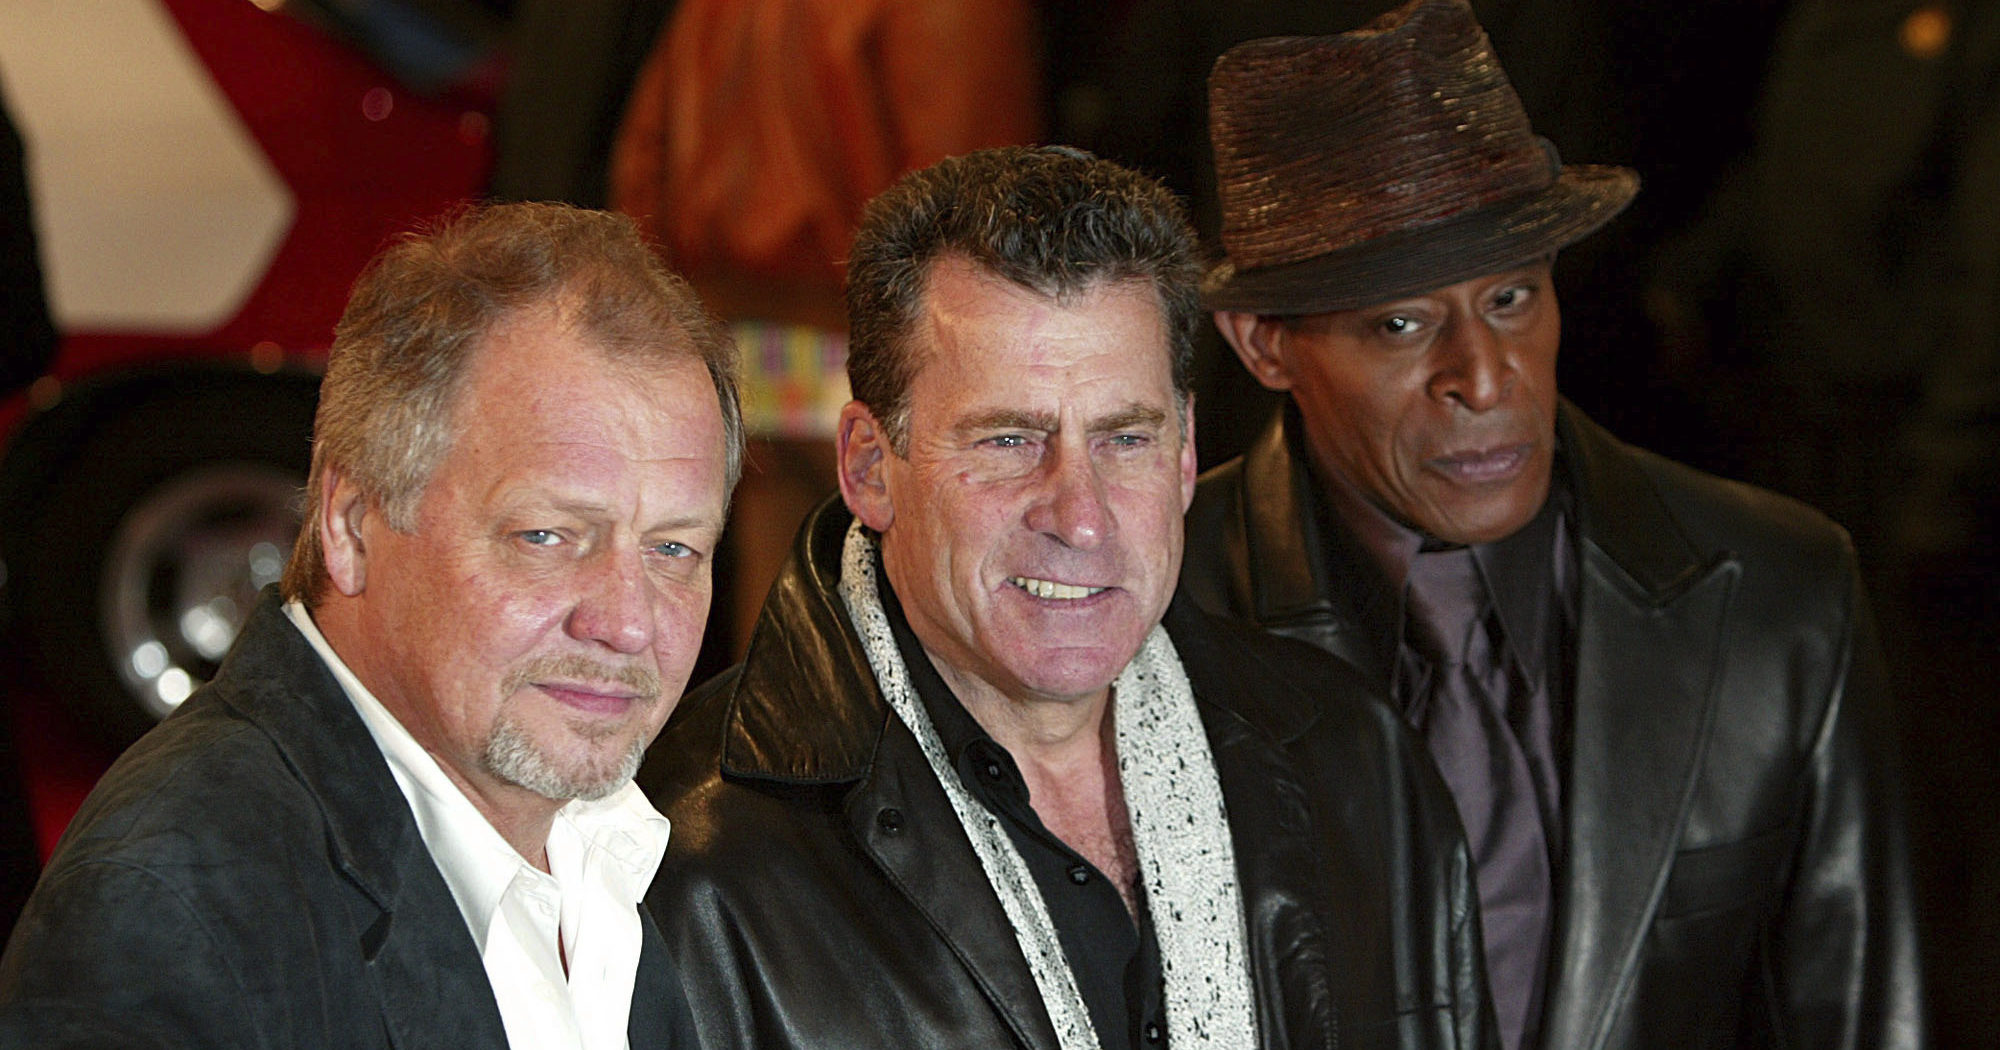 David Soul, left, Paul Michael Glaser, and Antonio Fargas, right, stars of the original 1970's 'Starsky and Hutch' television series arrive at the British premiere of the new movie of the same name based on the TV series in London, on Thursday March 11, 2004.